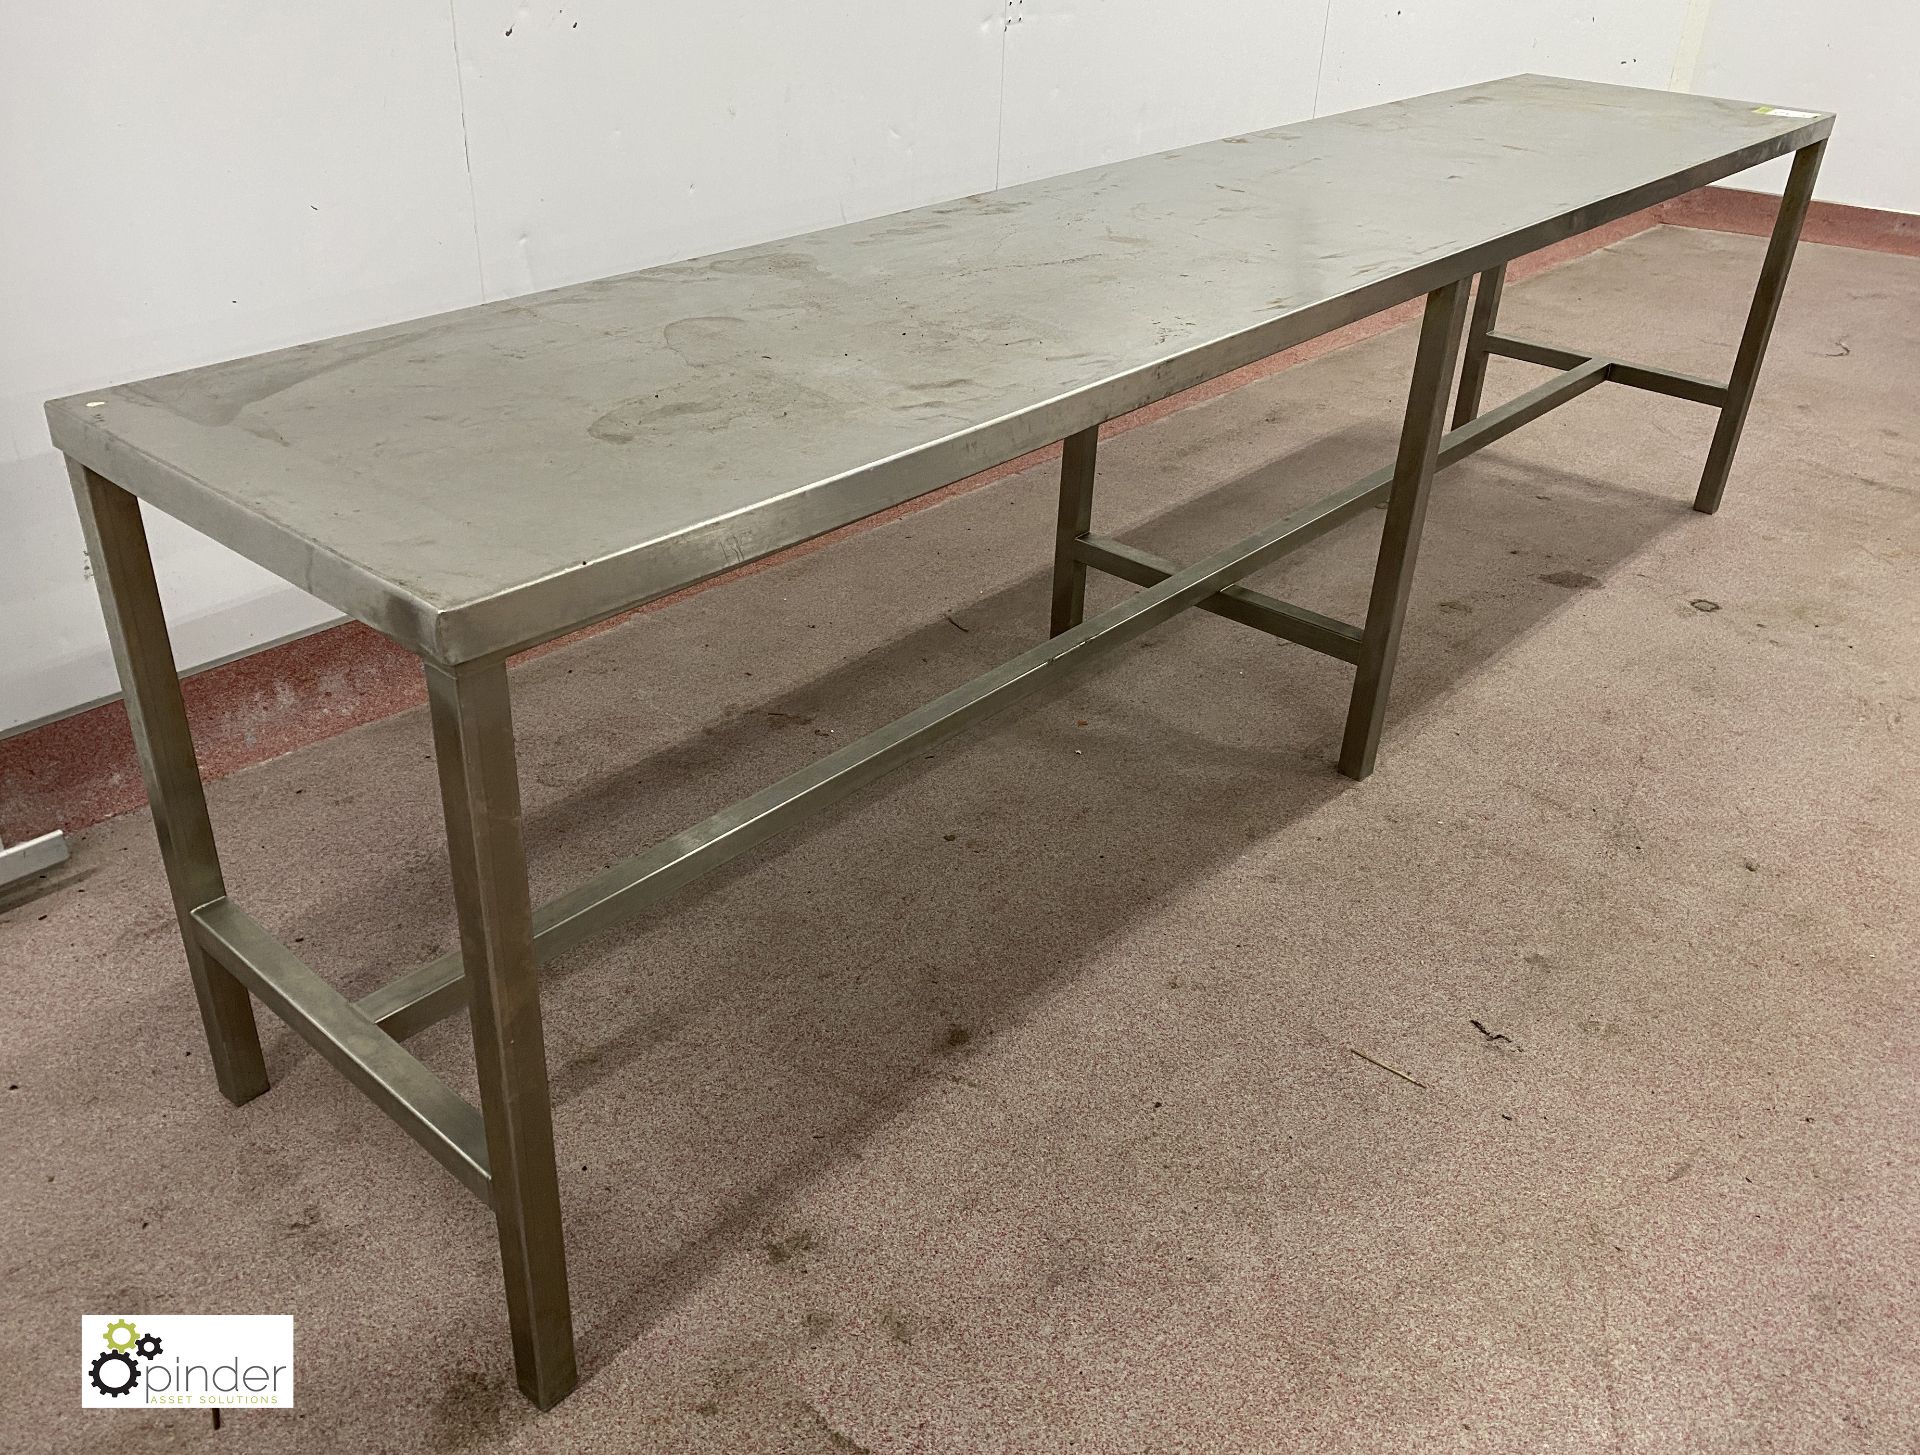 Stainless steel Preparation Table, 3000mm x 600mm x 790mm (please note there is a lift out fee of £5 - Image 2 of 2